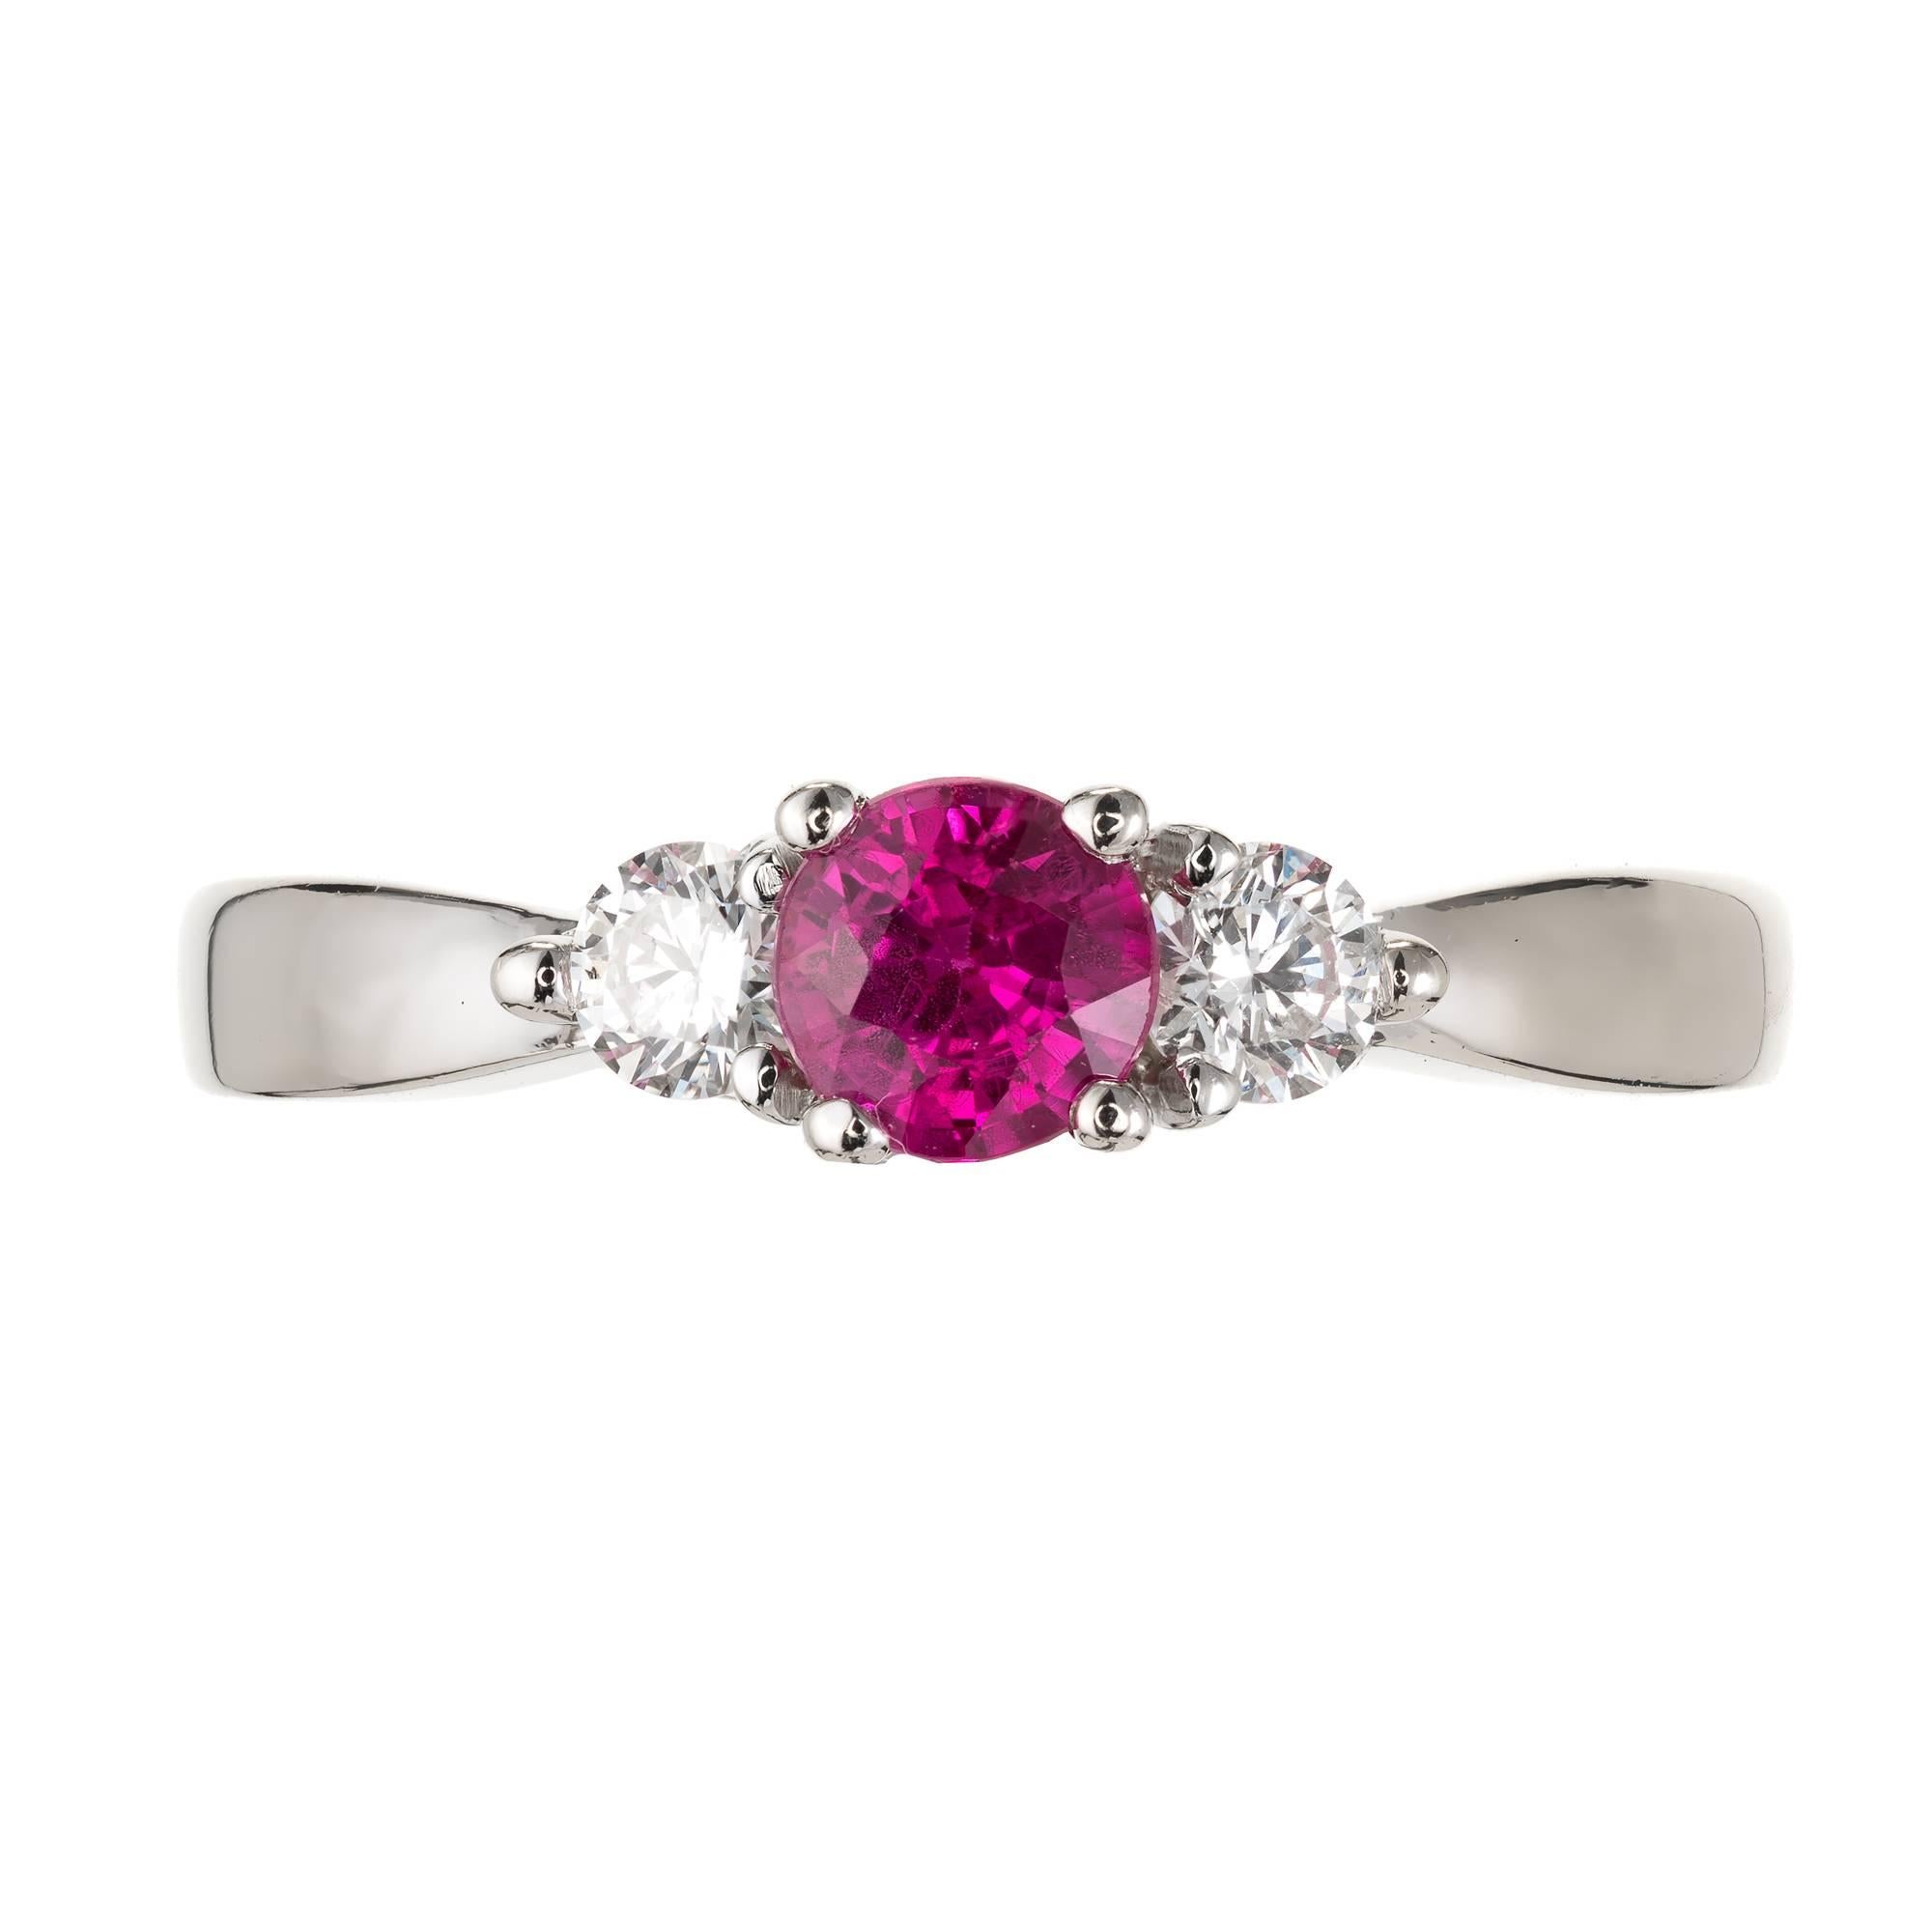 GIA certified purplish pink vivid Sapphire and diamond three-stone engagement ring, in a 14k white gold setting. Natural Sapphire simple heat only. 

1 round brilliant step cut purplish pink Sapphire, approx. total weight .56cts, SI1, natural,